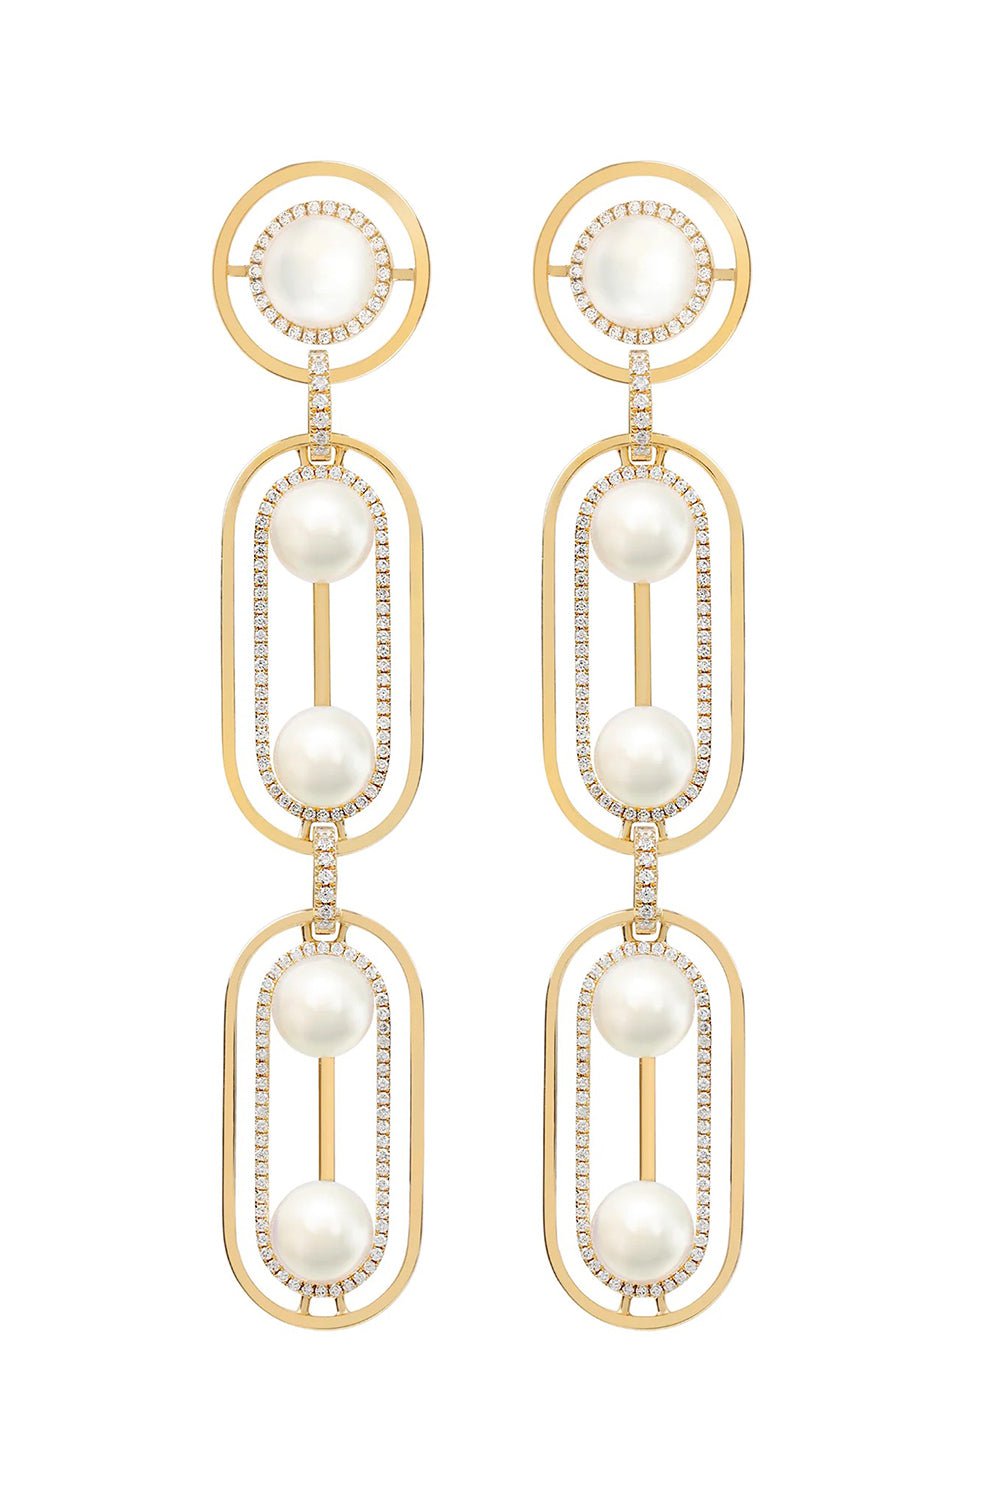 STATE PROPERTY-Ellipsis Drop Earrings-YELLOW GOLD